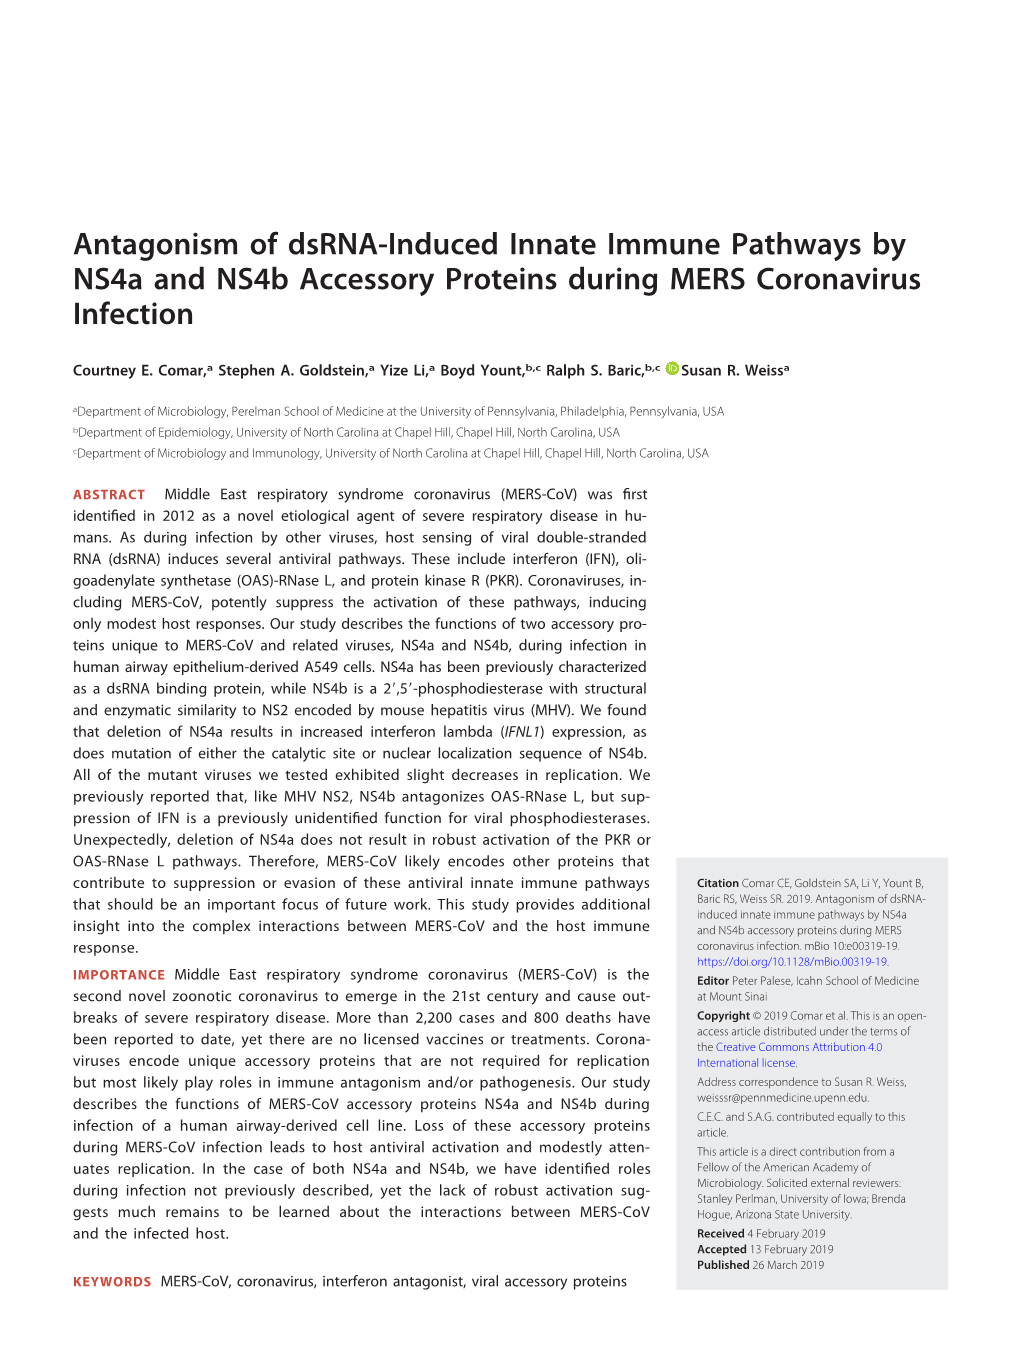 Antagonism of Dsrna-Induced Innate Immune Pathways by Ns4a and Ns4b Accessory Proteins During MERS Coronavirus Infection